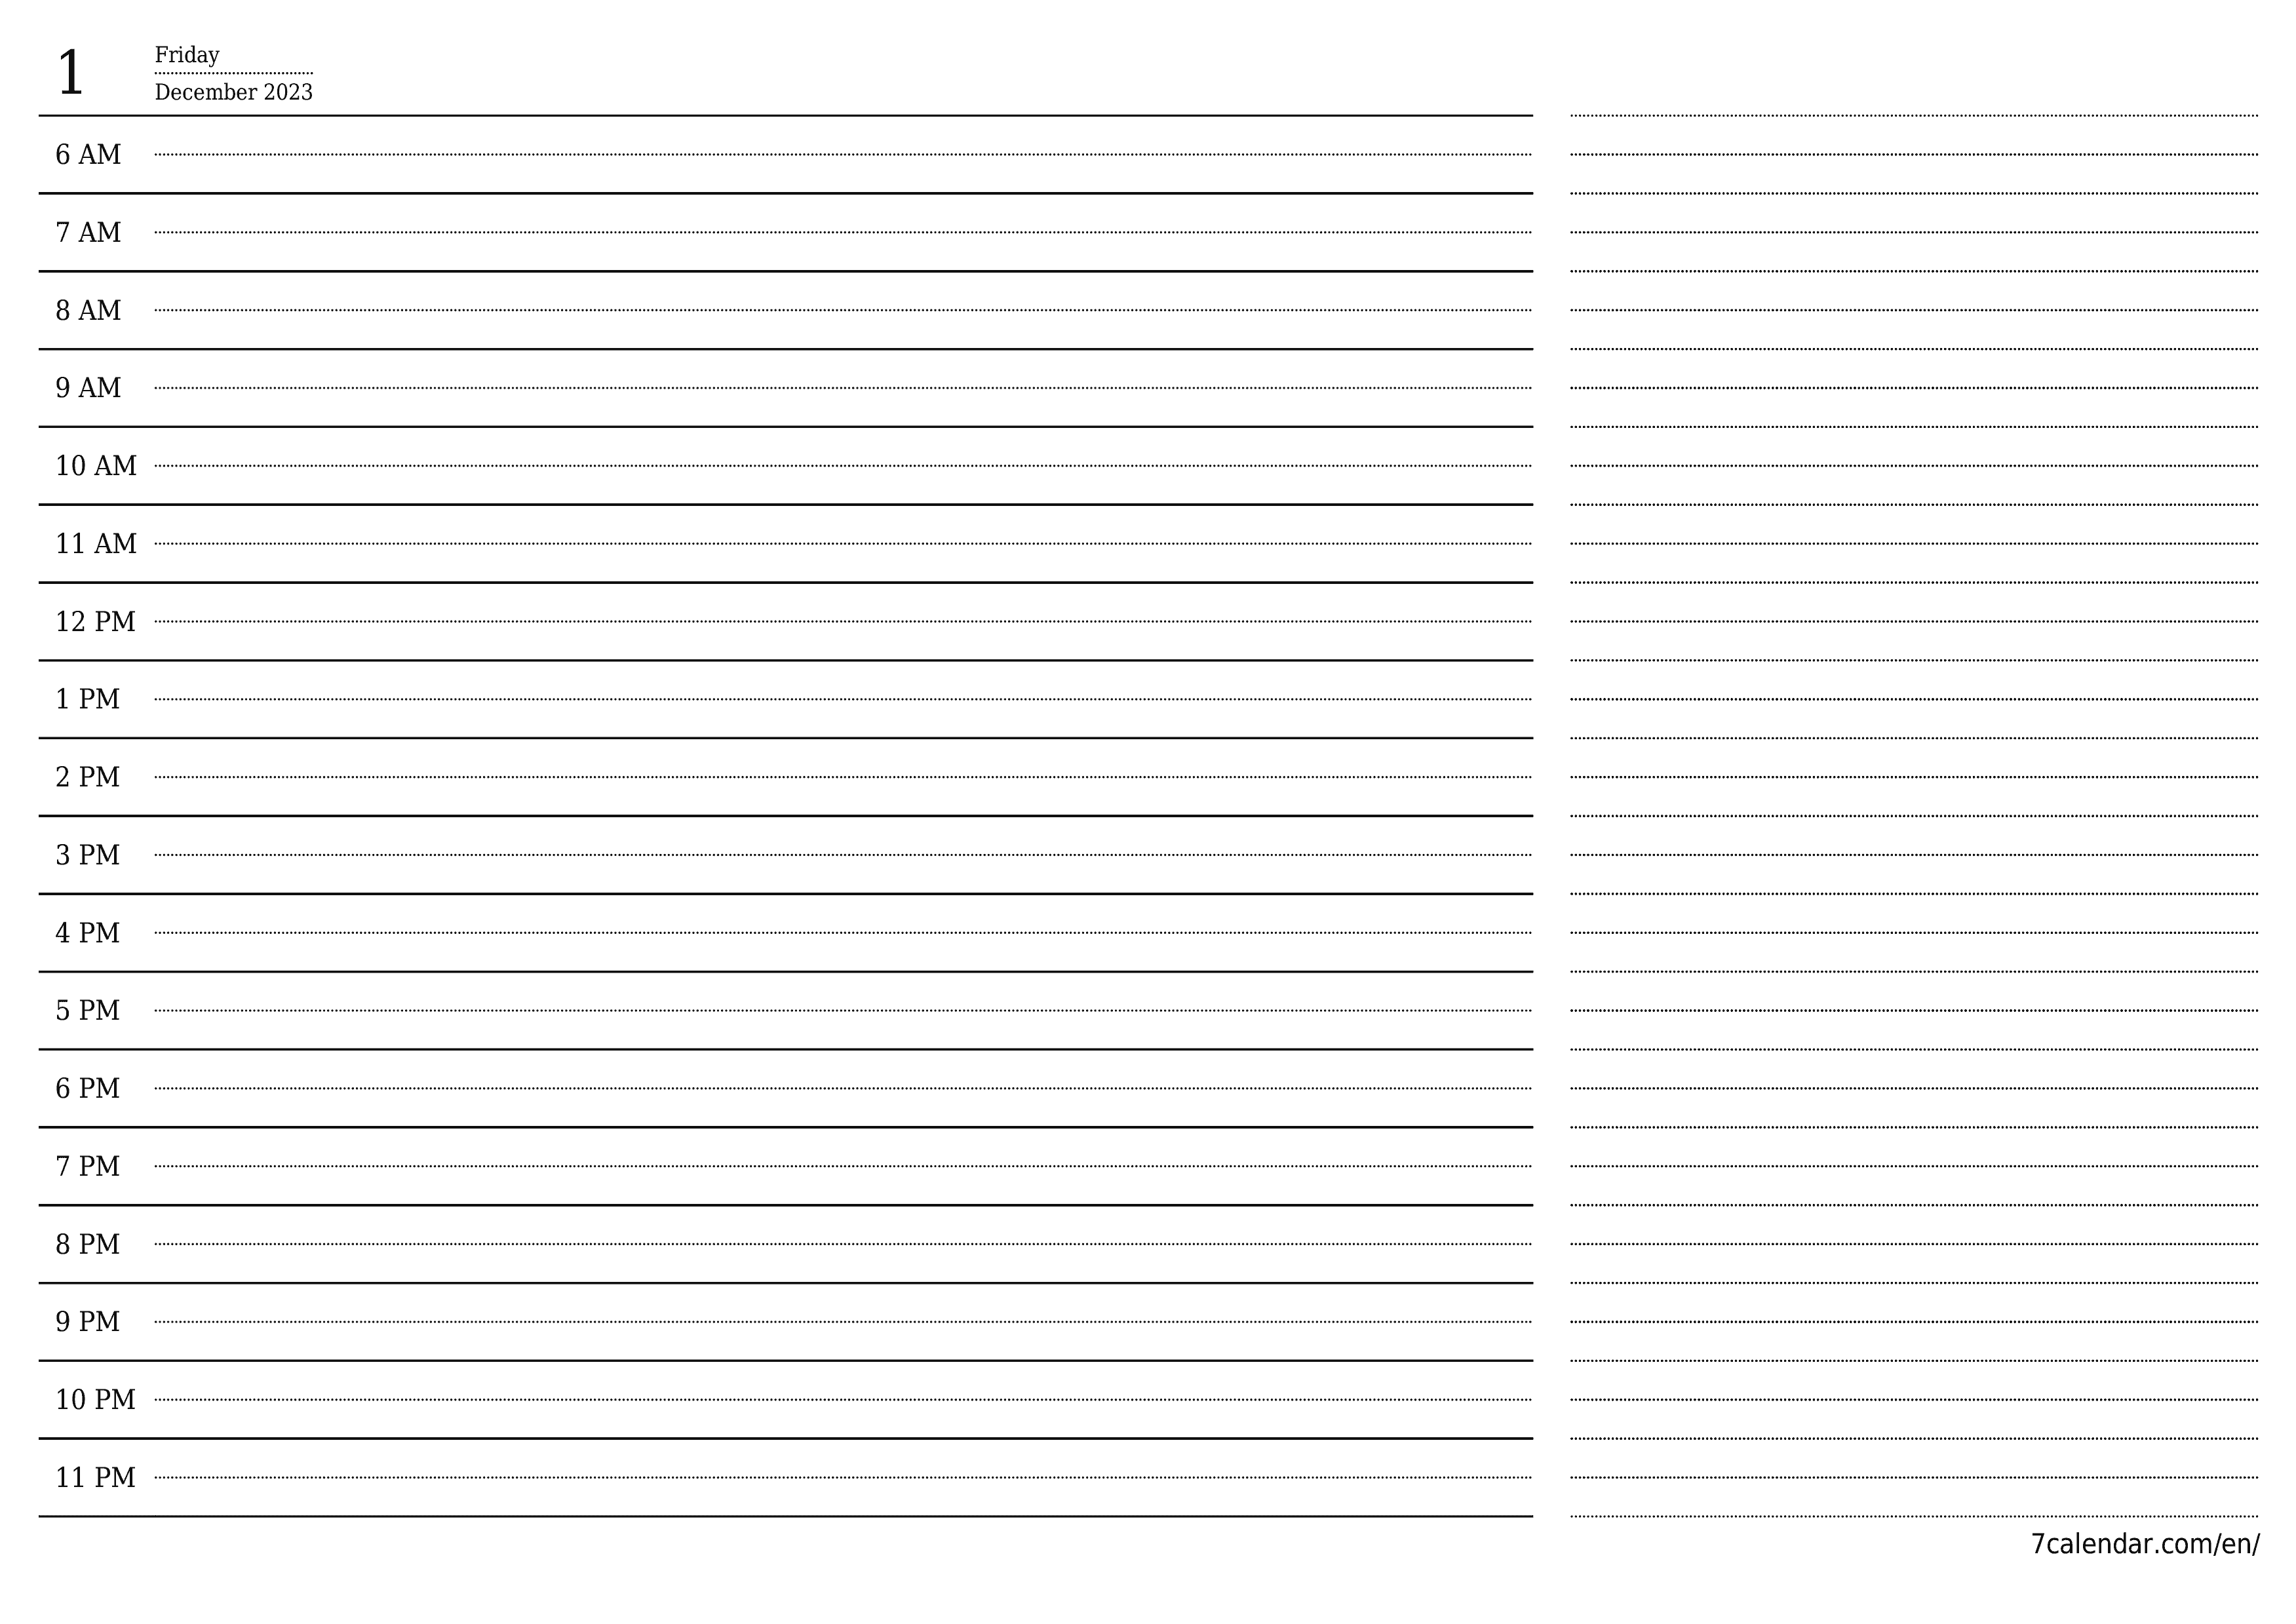 Blank daily printable calendar and planner for day December 2023 with notes, save and print to PDF PNG English - 7calendar.com